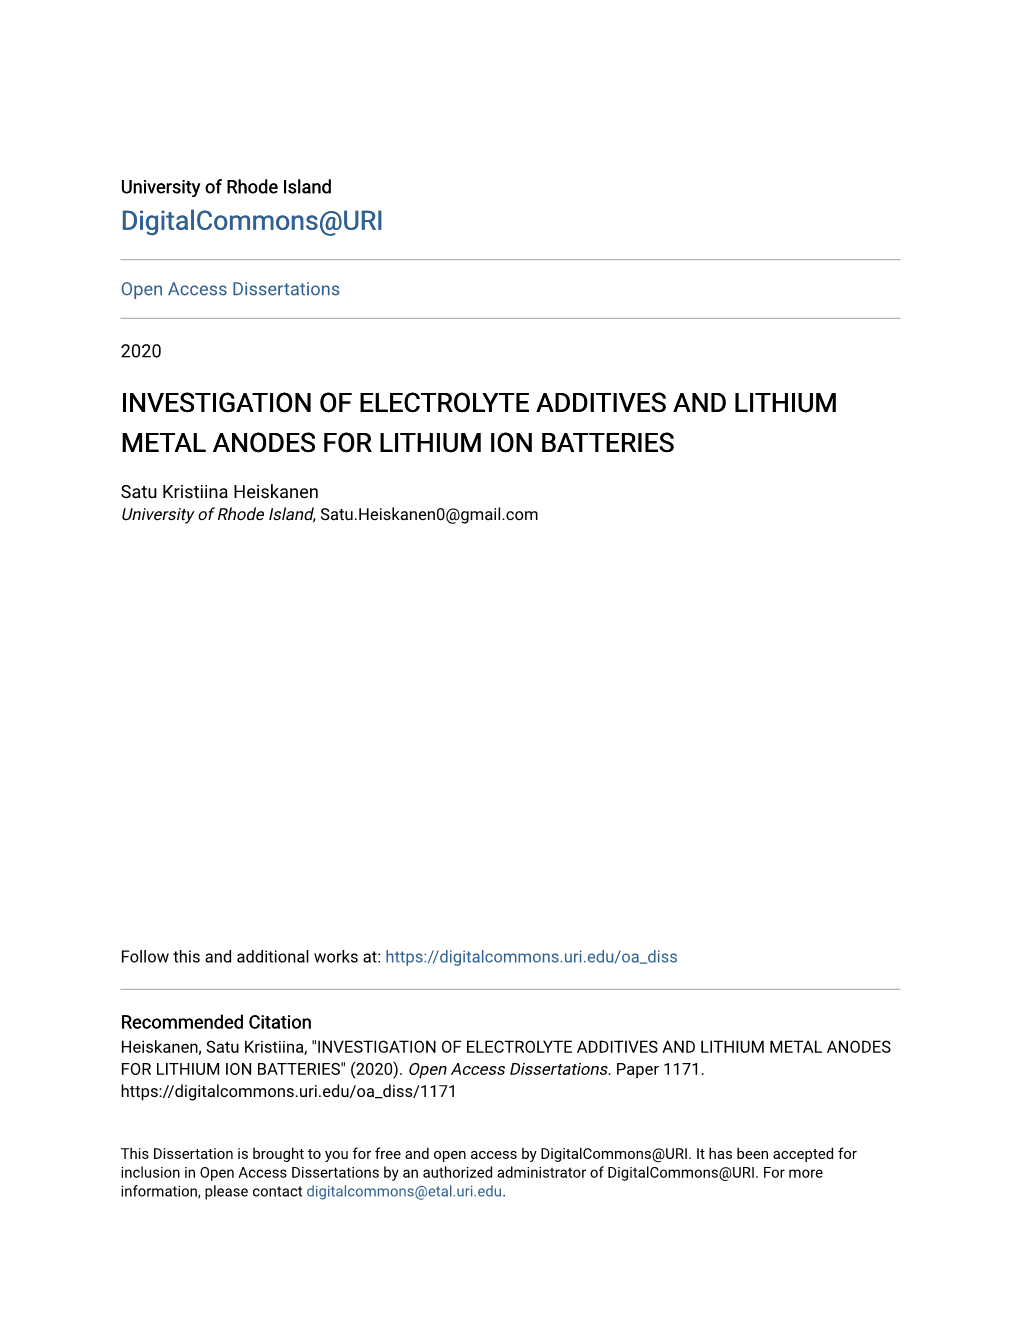 Investigation of Electrolyte Additives and Lithium Metal Anodes for Lithium Ion Batteries